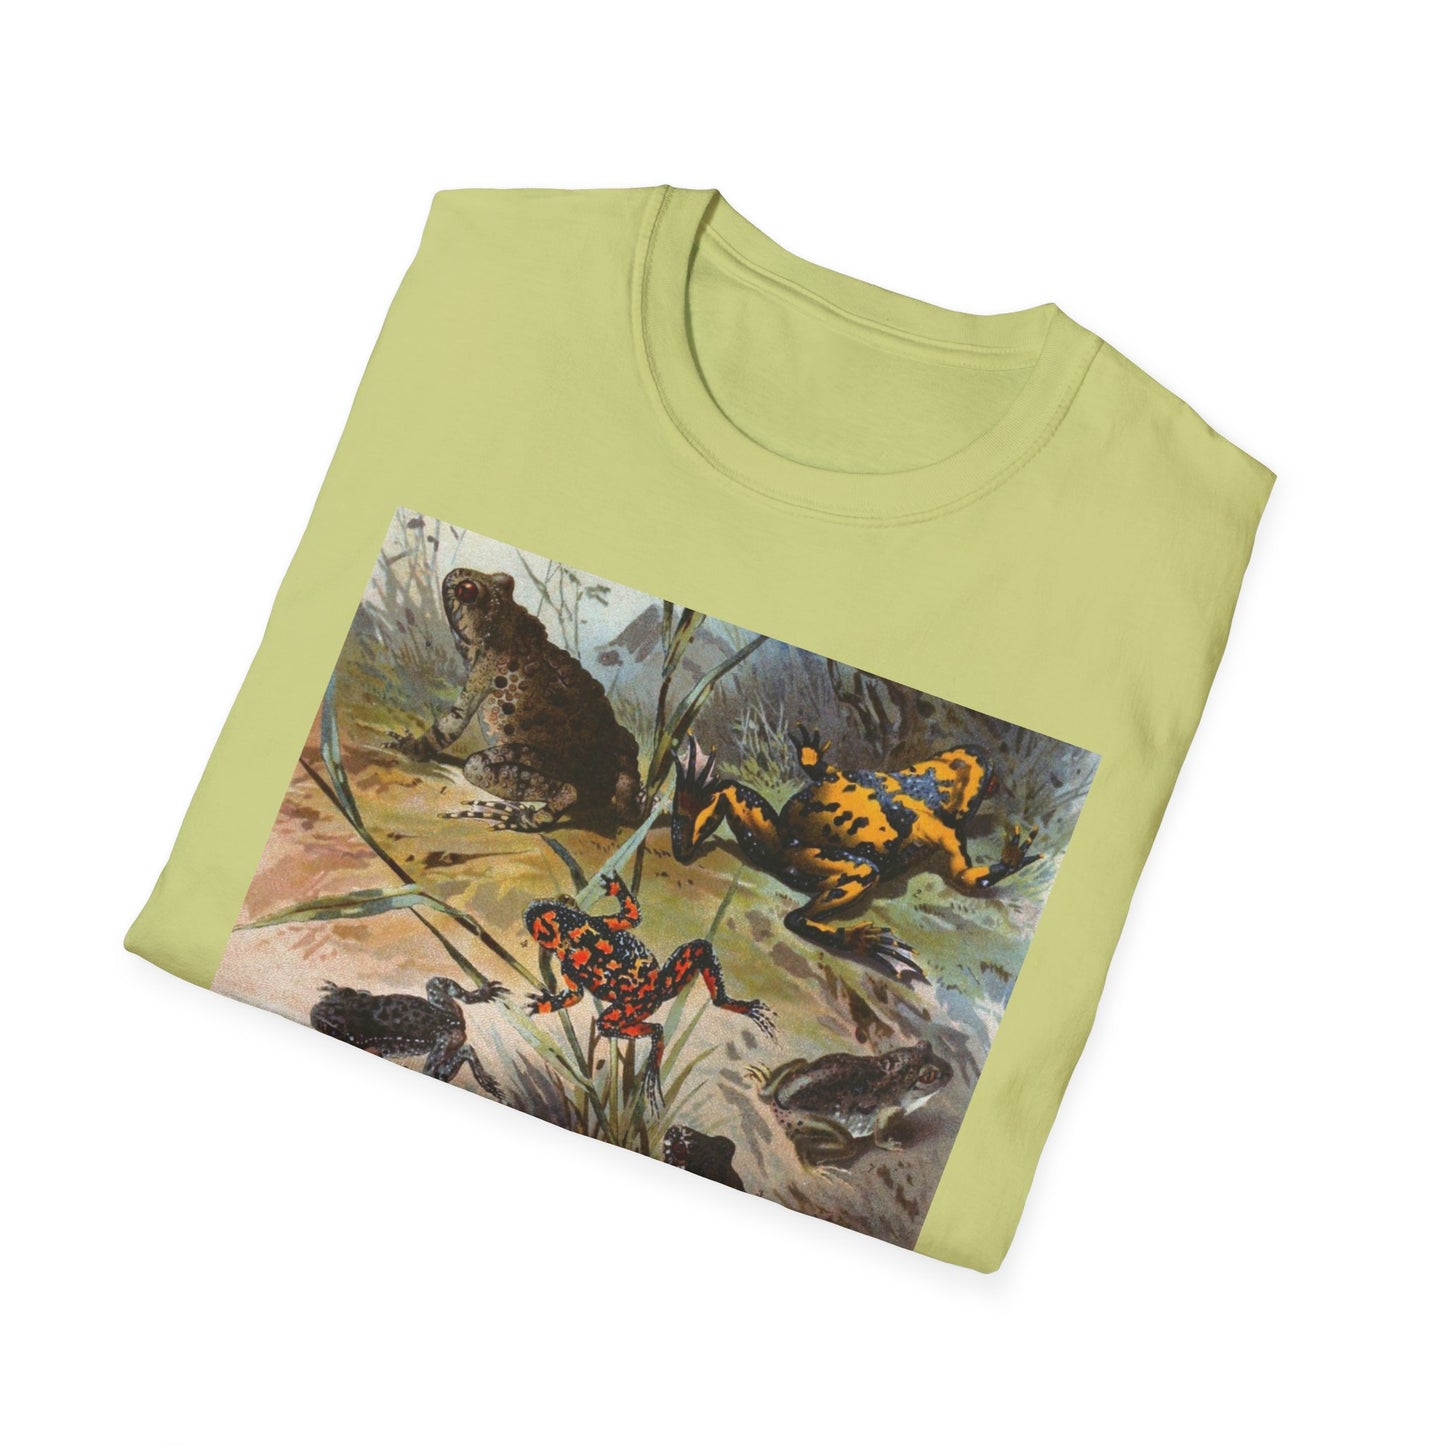 Frogs in a Pond T-Shirt